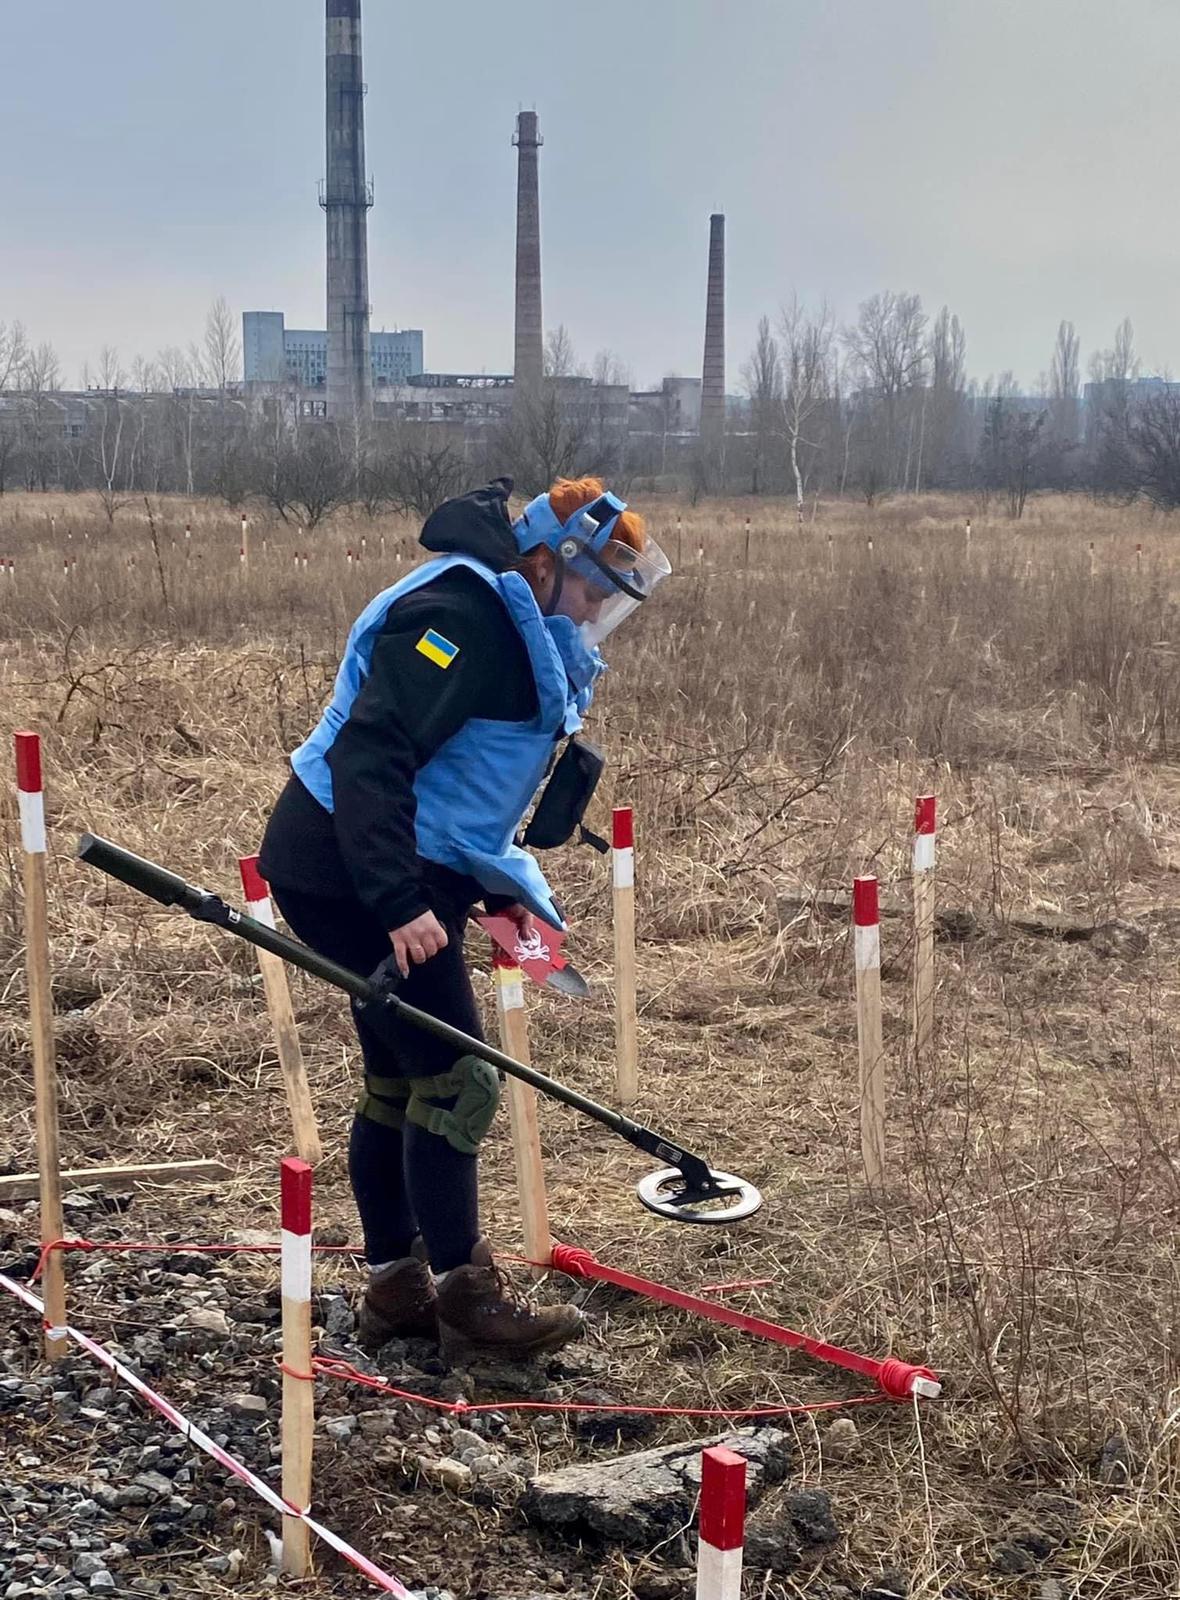 FSD staff practice using metal detectors to find landmines buried in the mud outside of Chernihiv. (credit: John Montgomery, FSD)